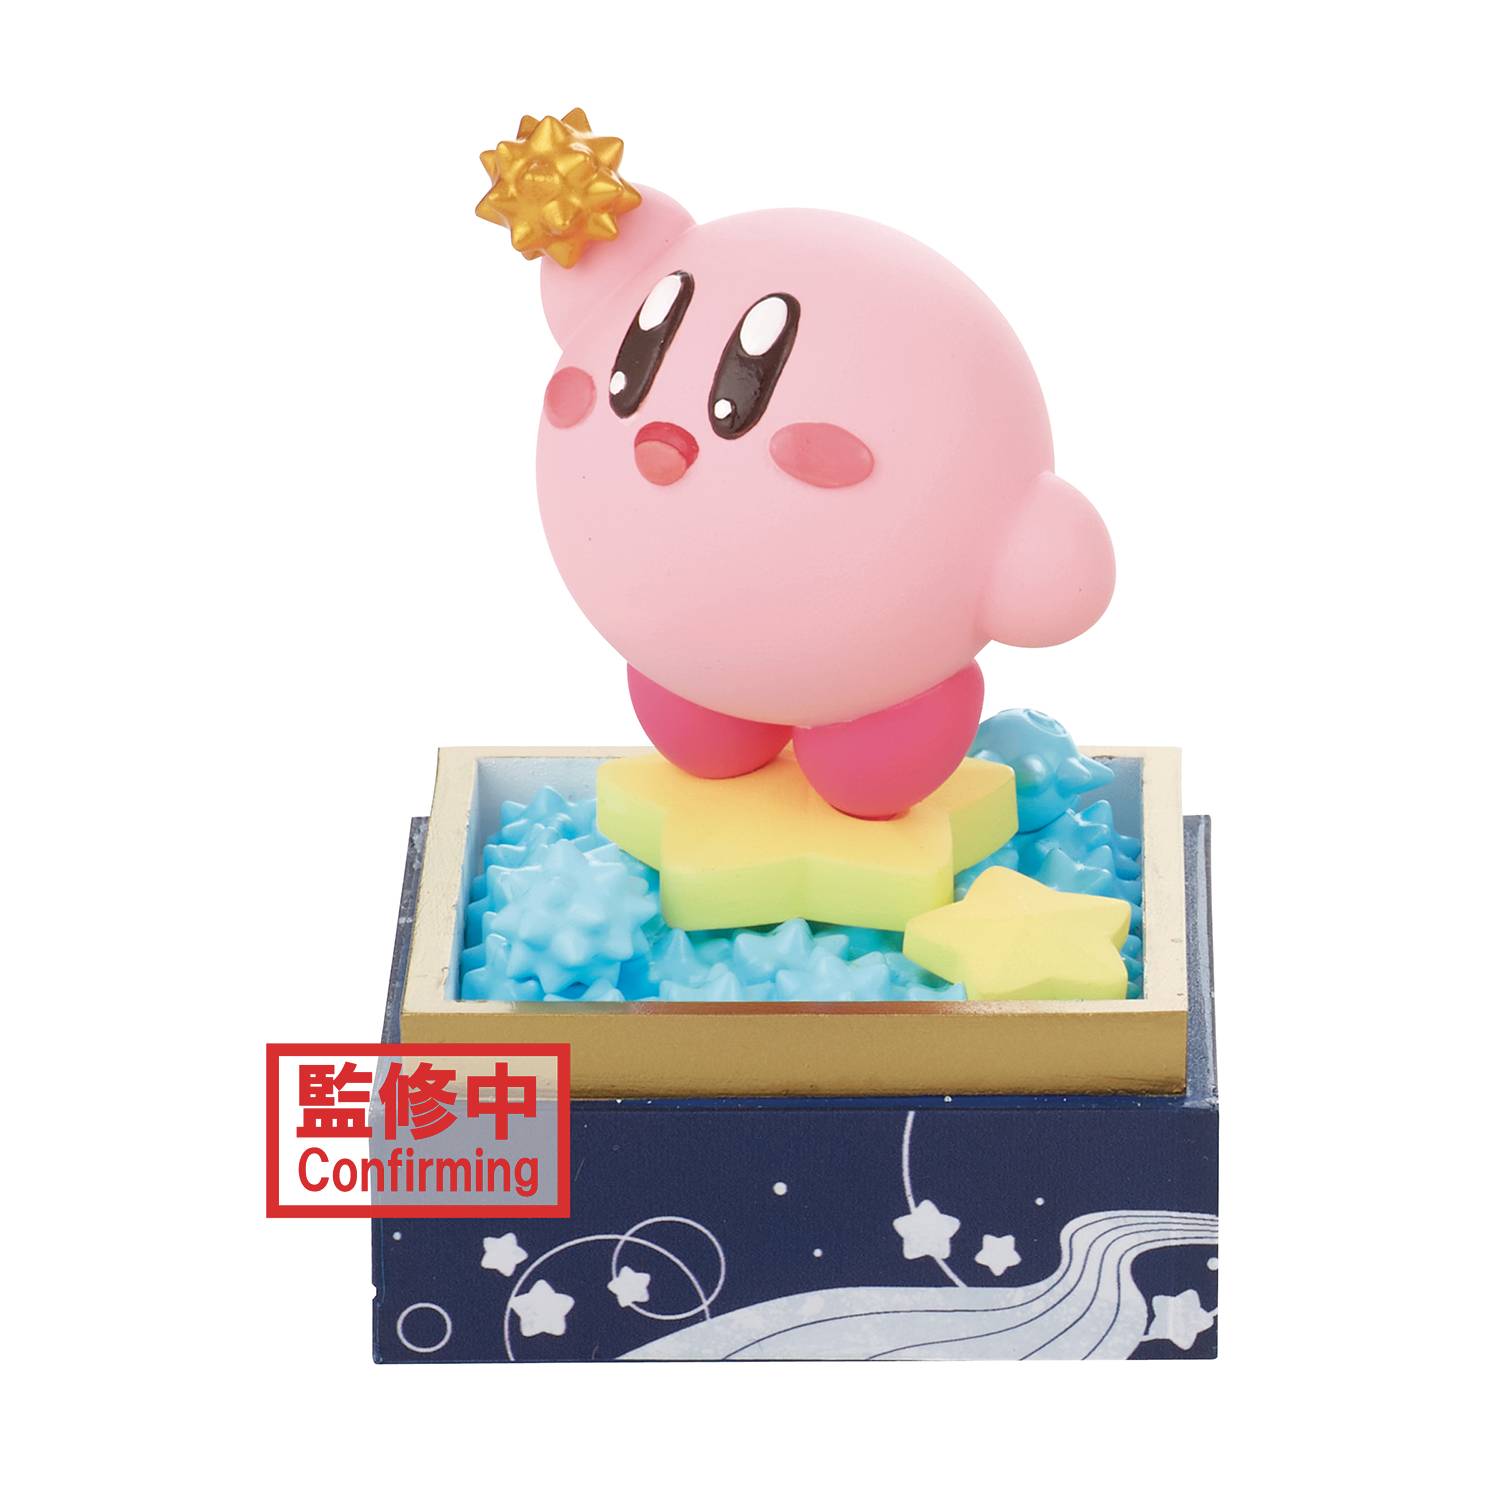 KIRBY PALDOLCE COLLECTION V4 KIRBY FIG VER A